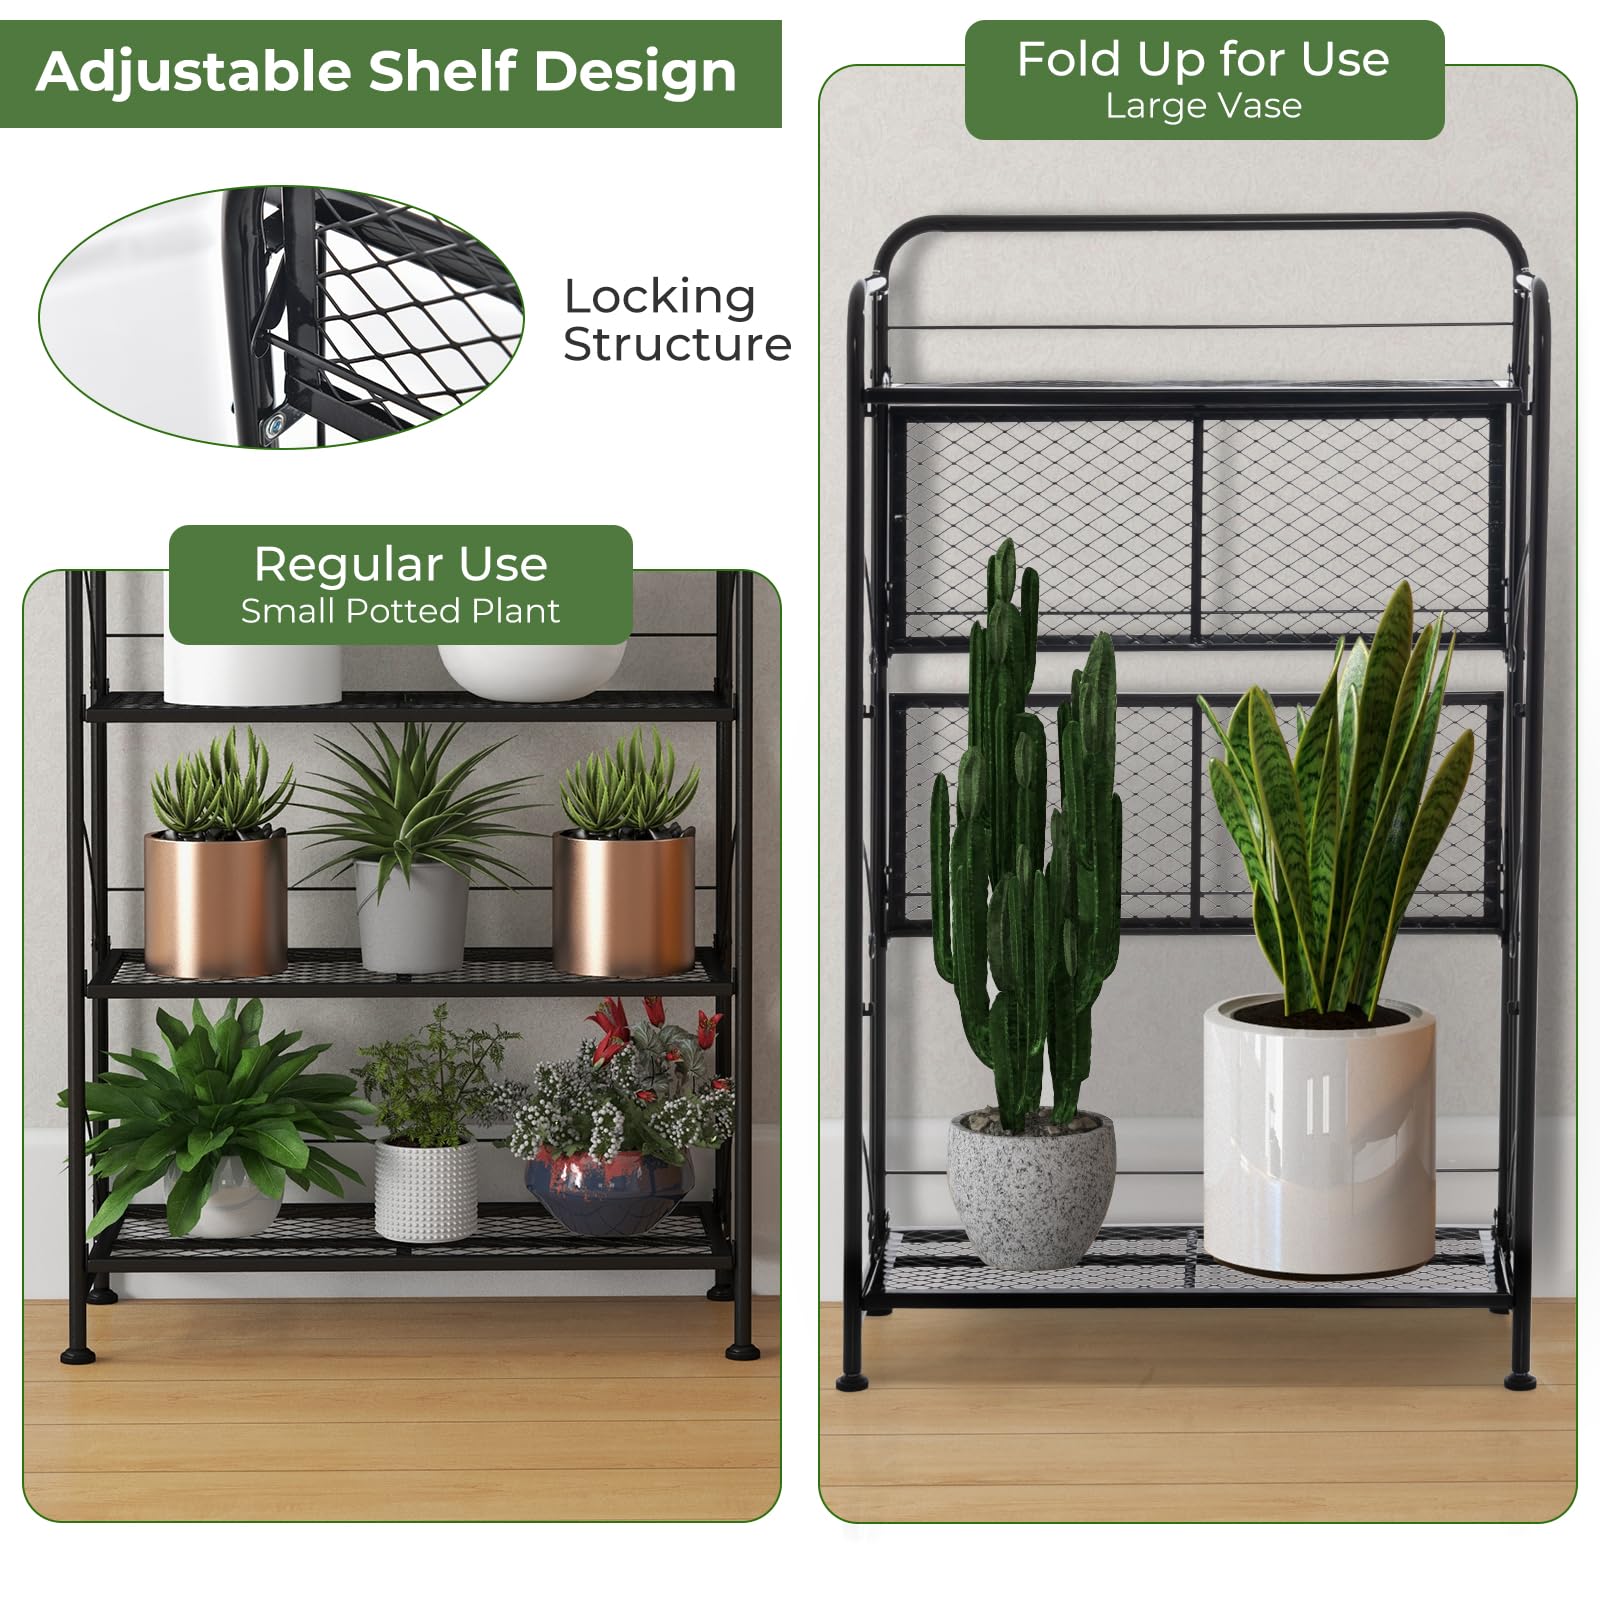 Giantex Folding Plant Stand, 4-Tires Collapsible Plant Rack with Adjustable Shelf, Black